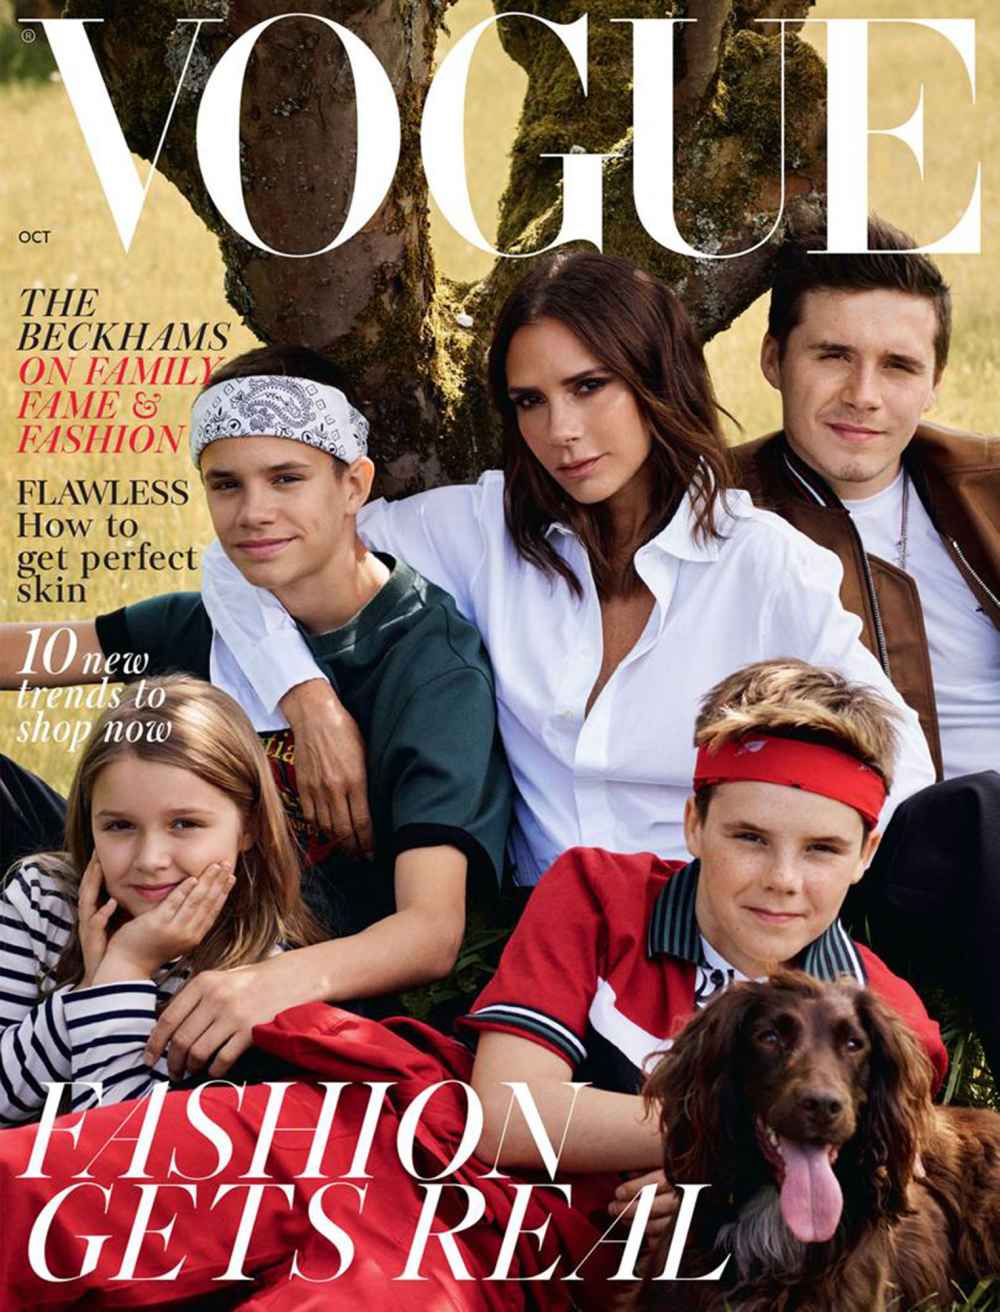 Beckham Family on the cover of British Vogue